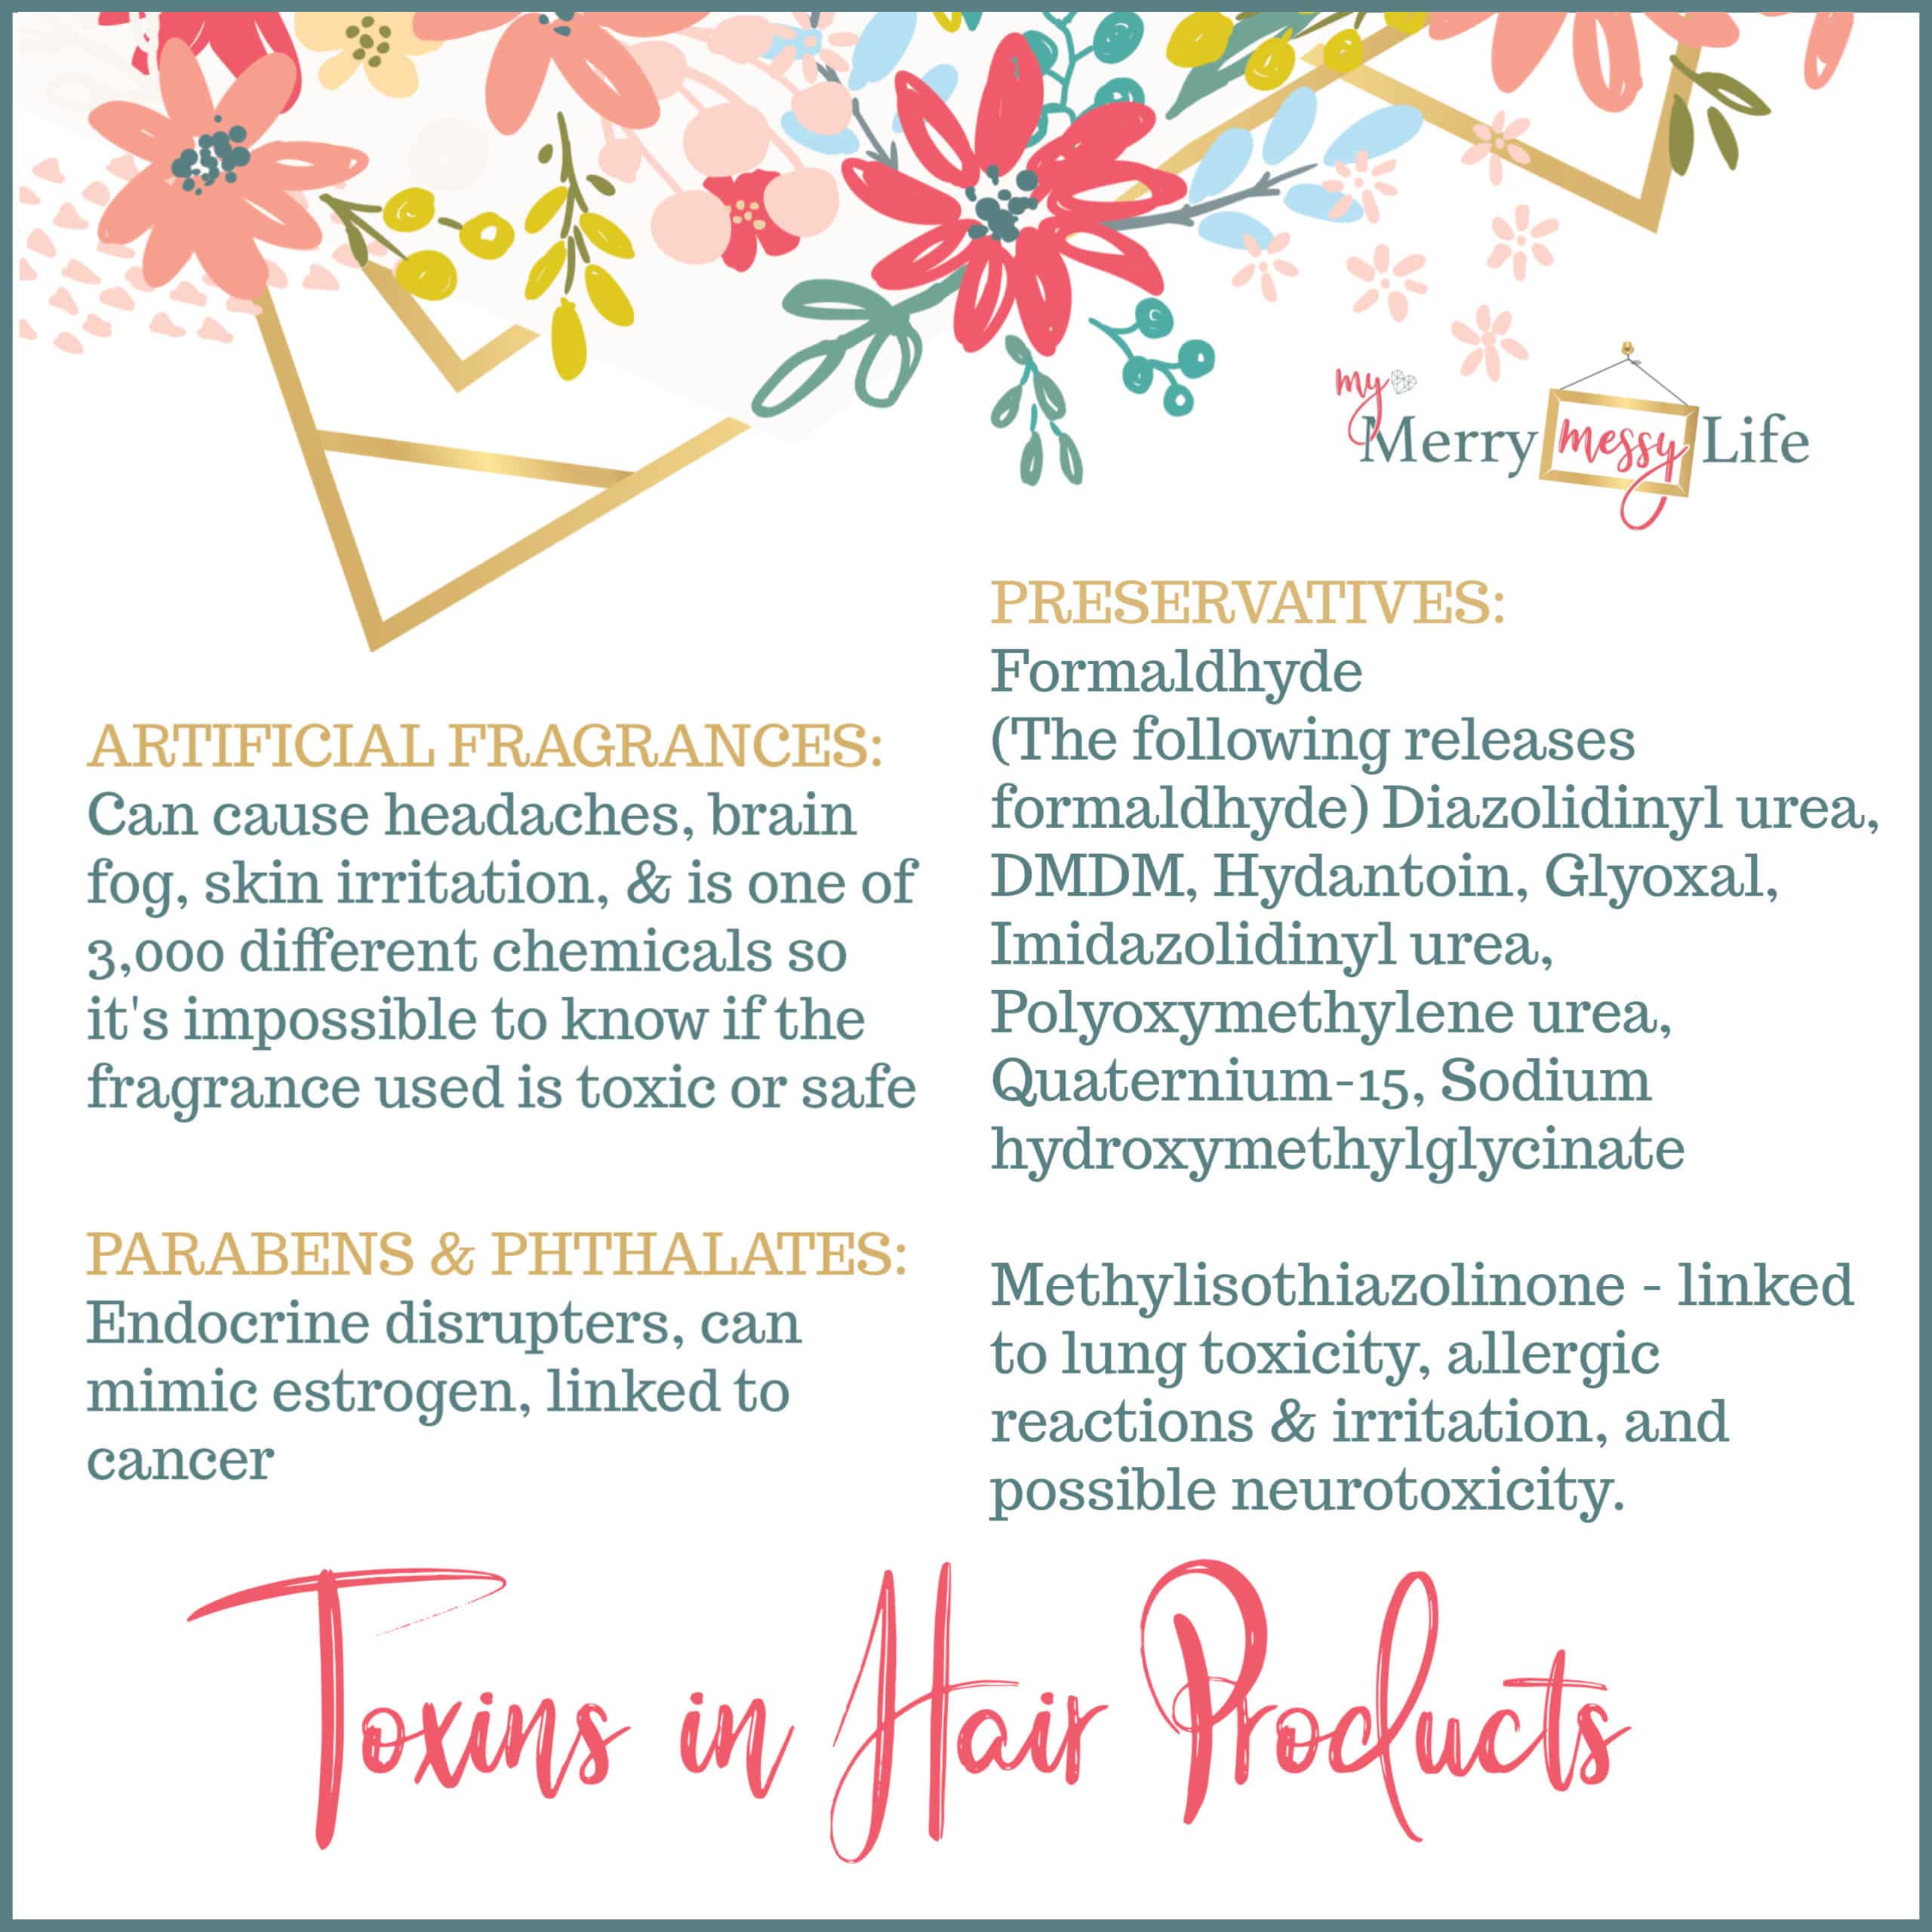 Toxins to Avoid in Curly Hair and Hair Products - Artificial Fragrances, Preservatives, Parabens and Phthalates